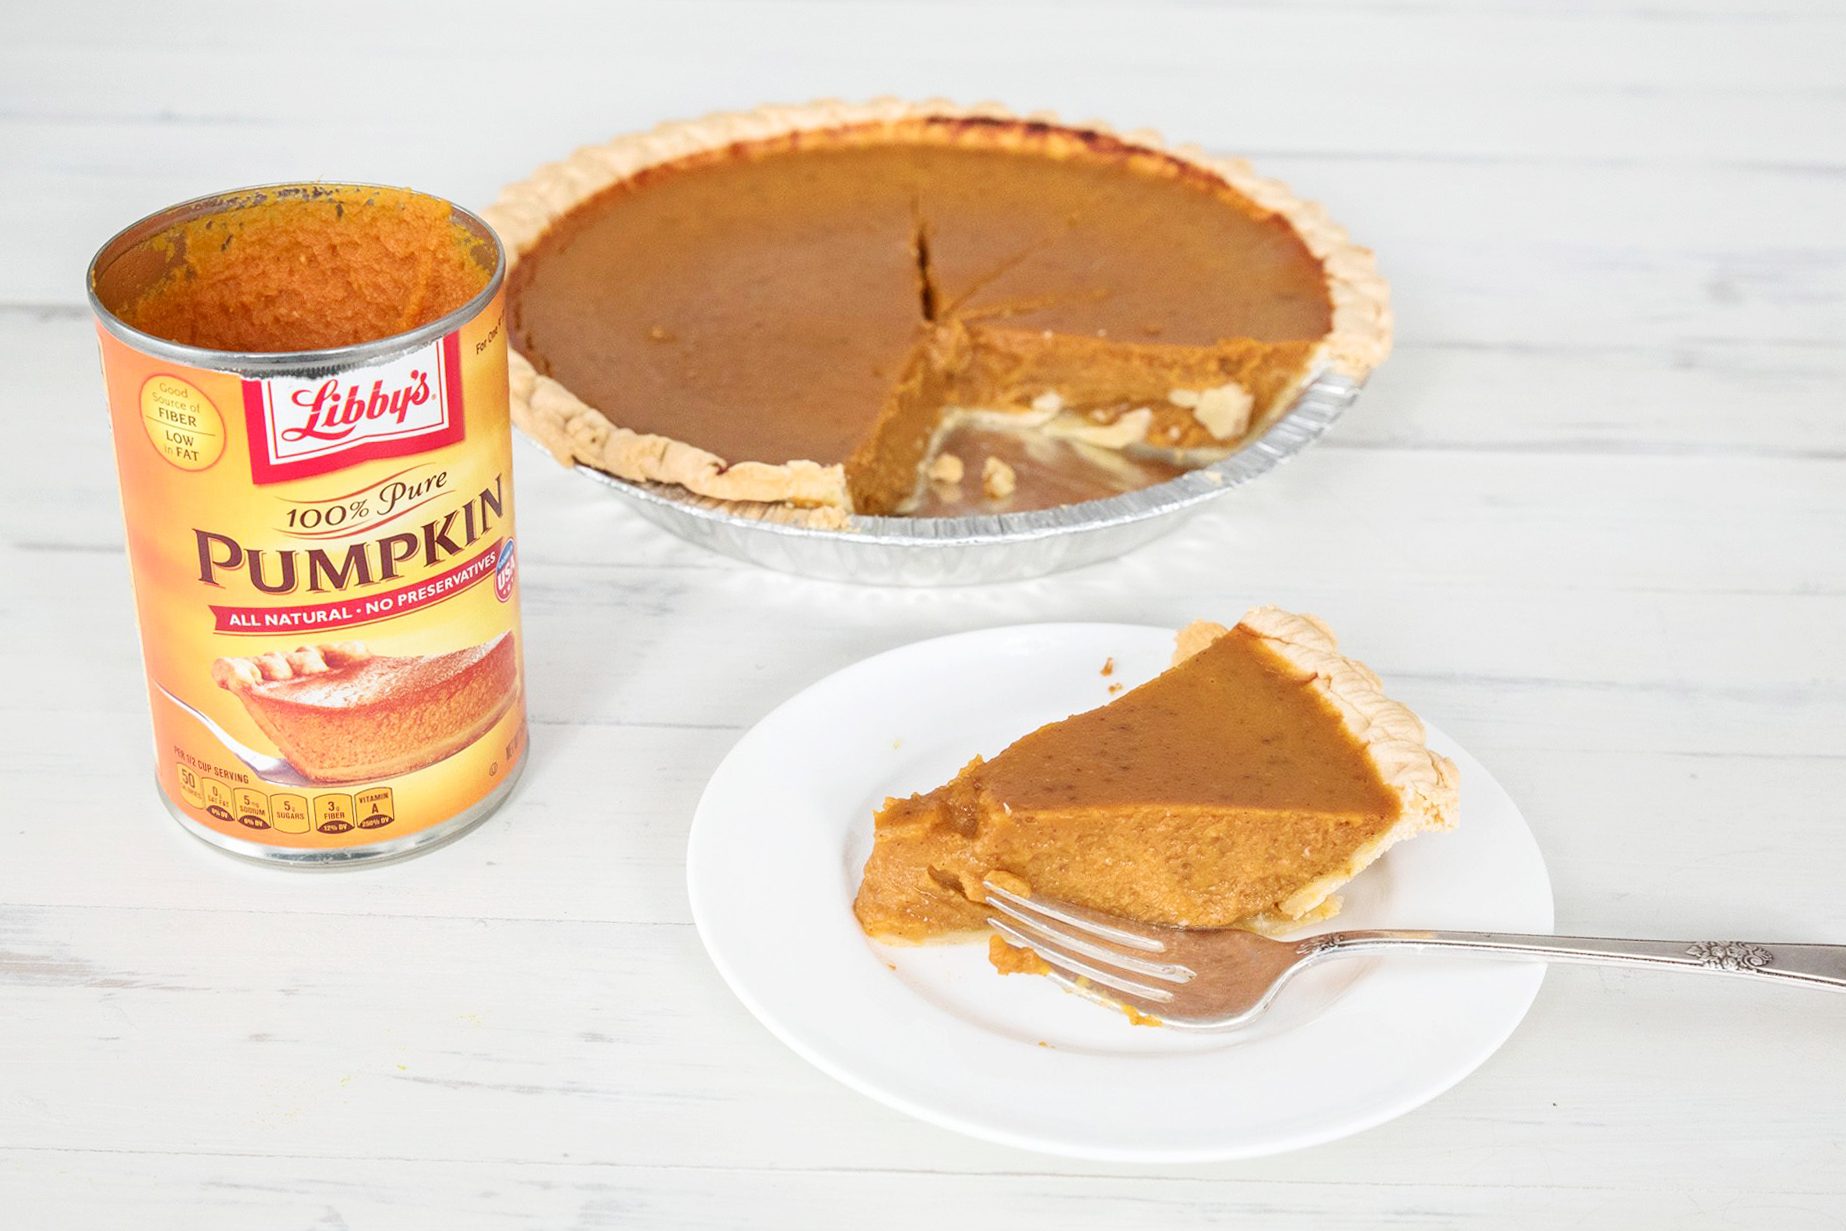 a can of libby's pumpkin, a pumpkin pie in pie dish with a slice missing, and a slice of pie on a white plate with a fork